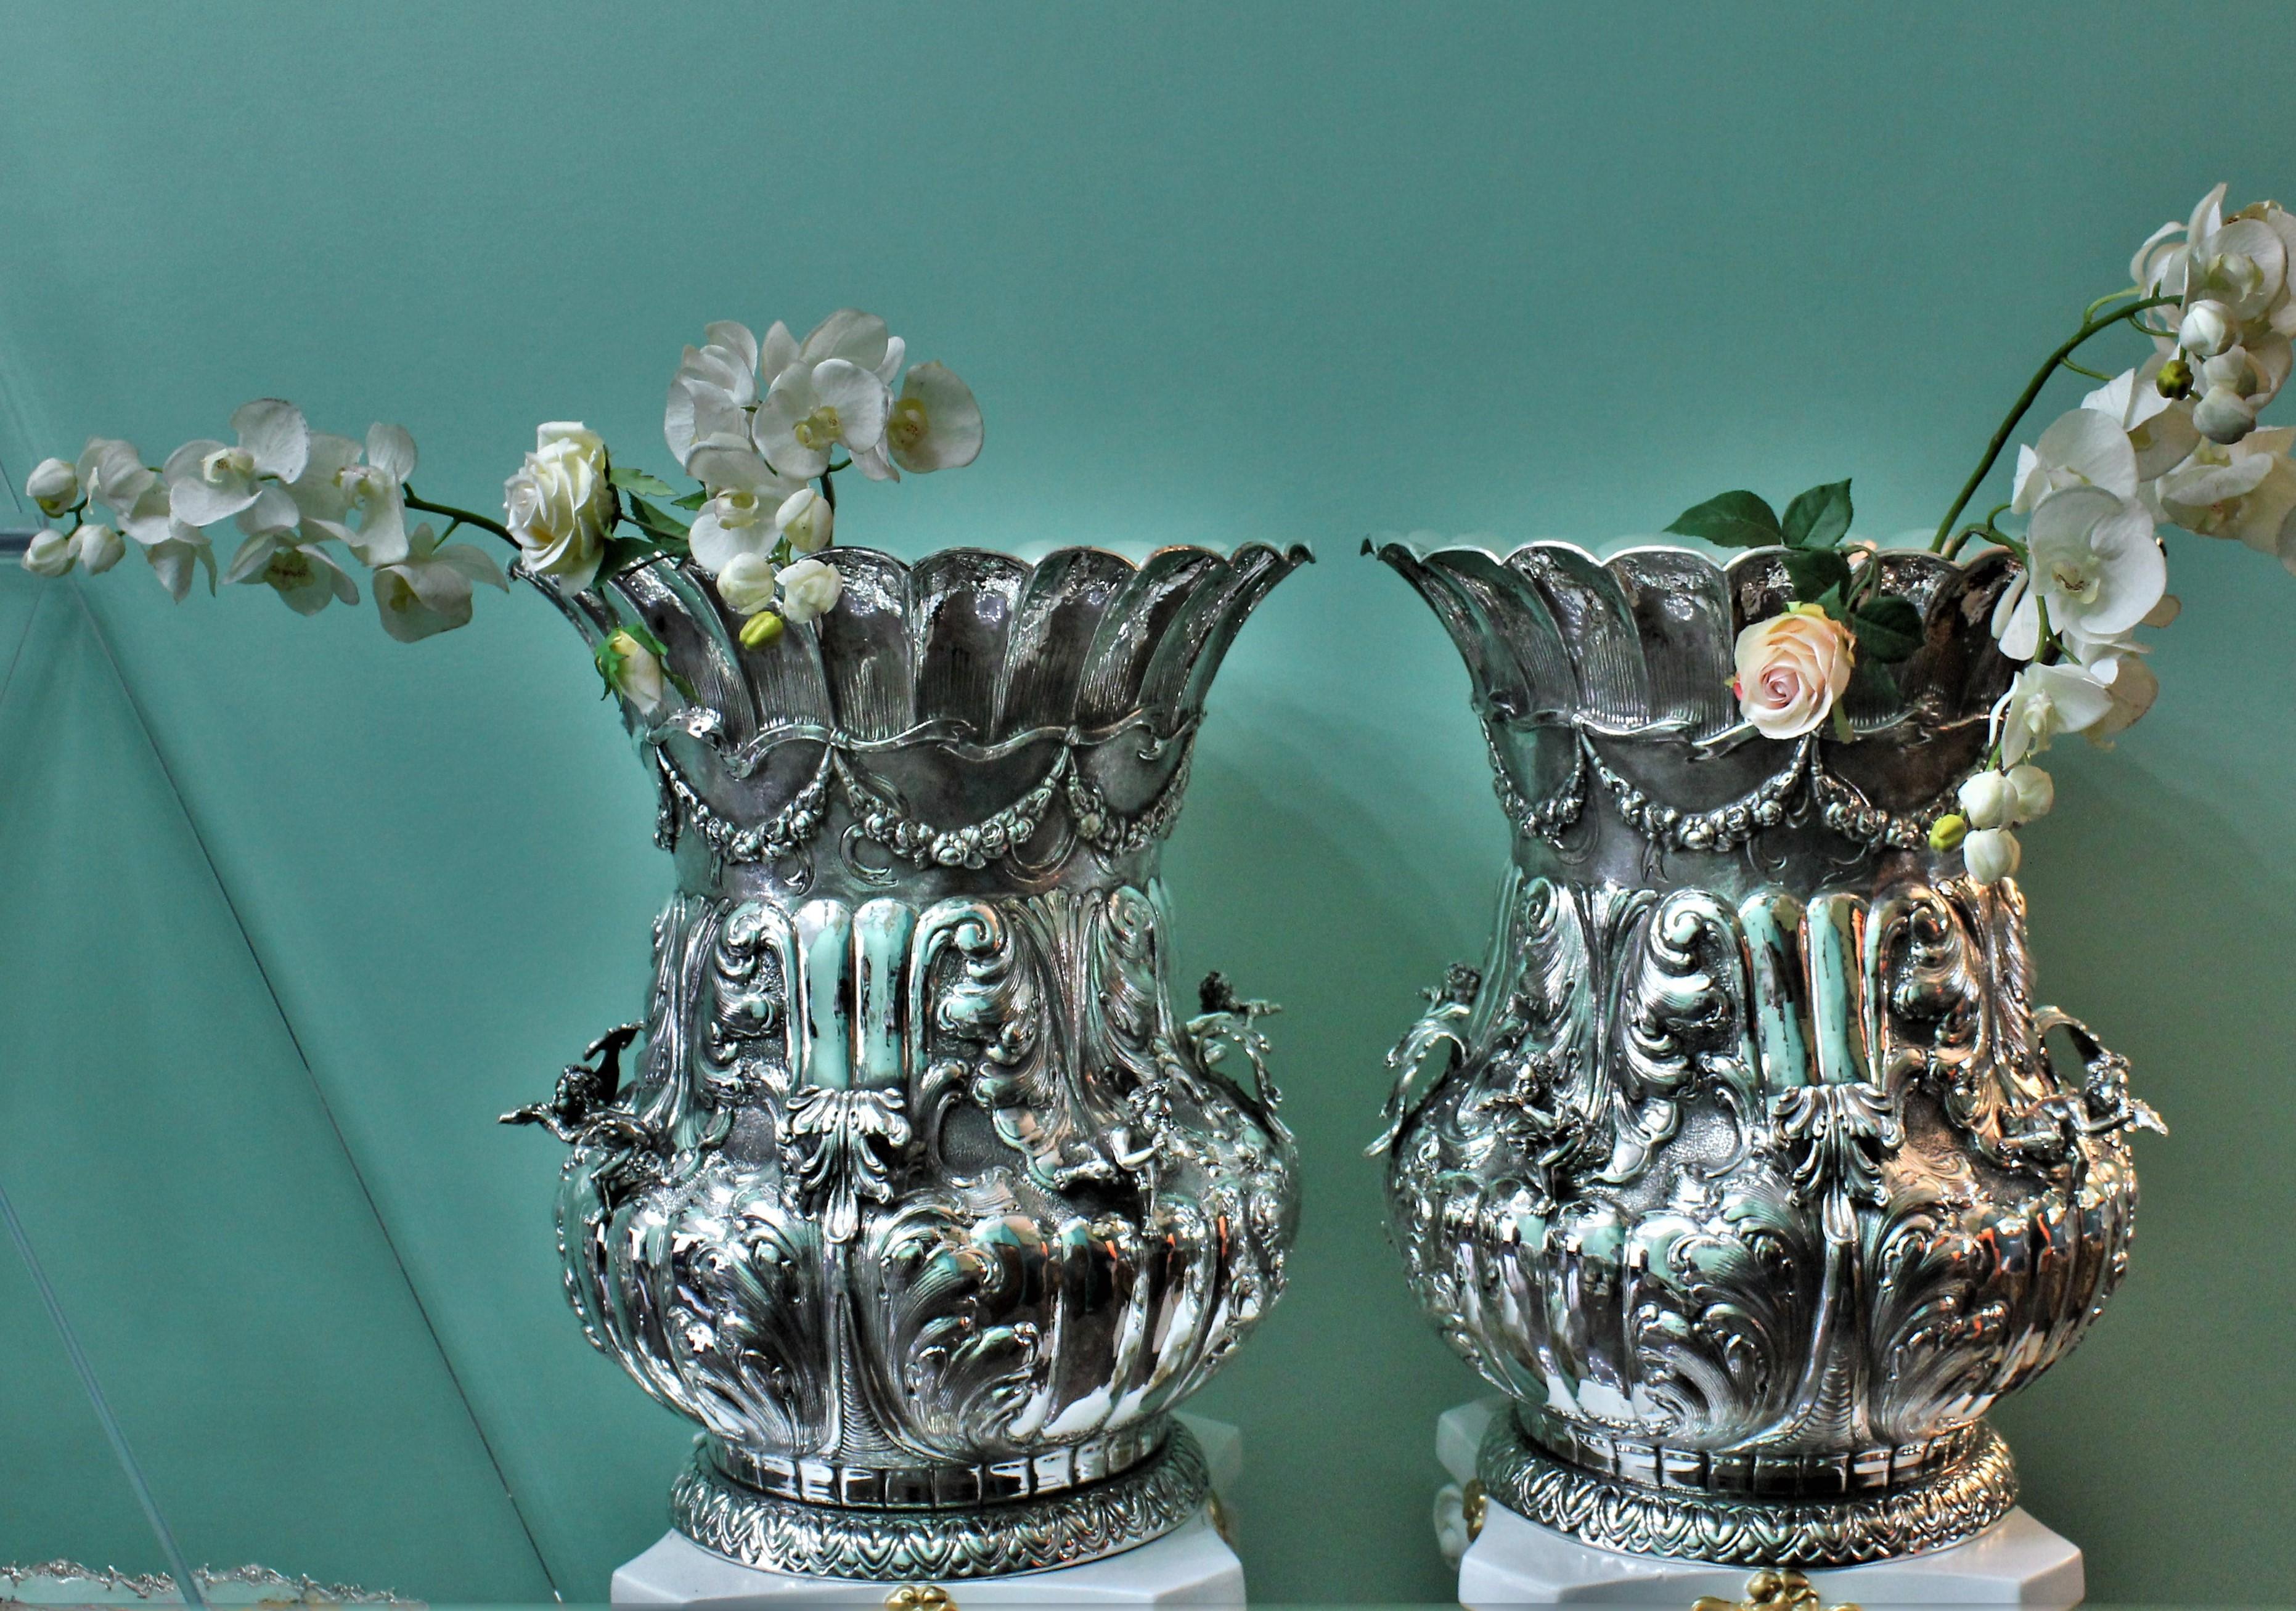 Majestic pair of engraved silver flower vases realized by the Italian silversmith Luigi Diani between 1934 and 1944. Silver 800/1000 marks, maker marks and maker signature.
Entirely handcrafted, embossed and engraved by expert hands. Four silver